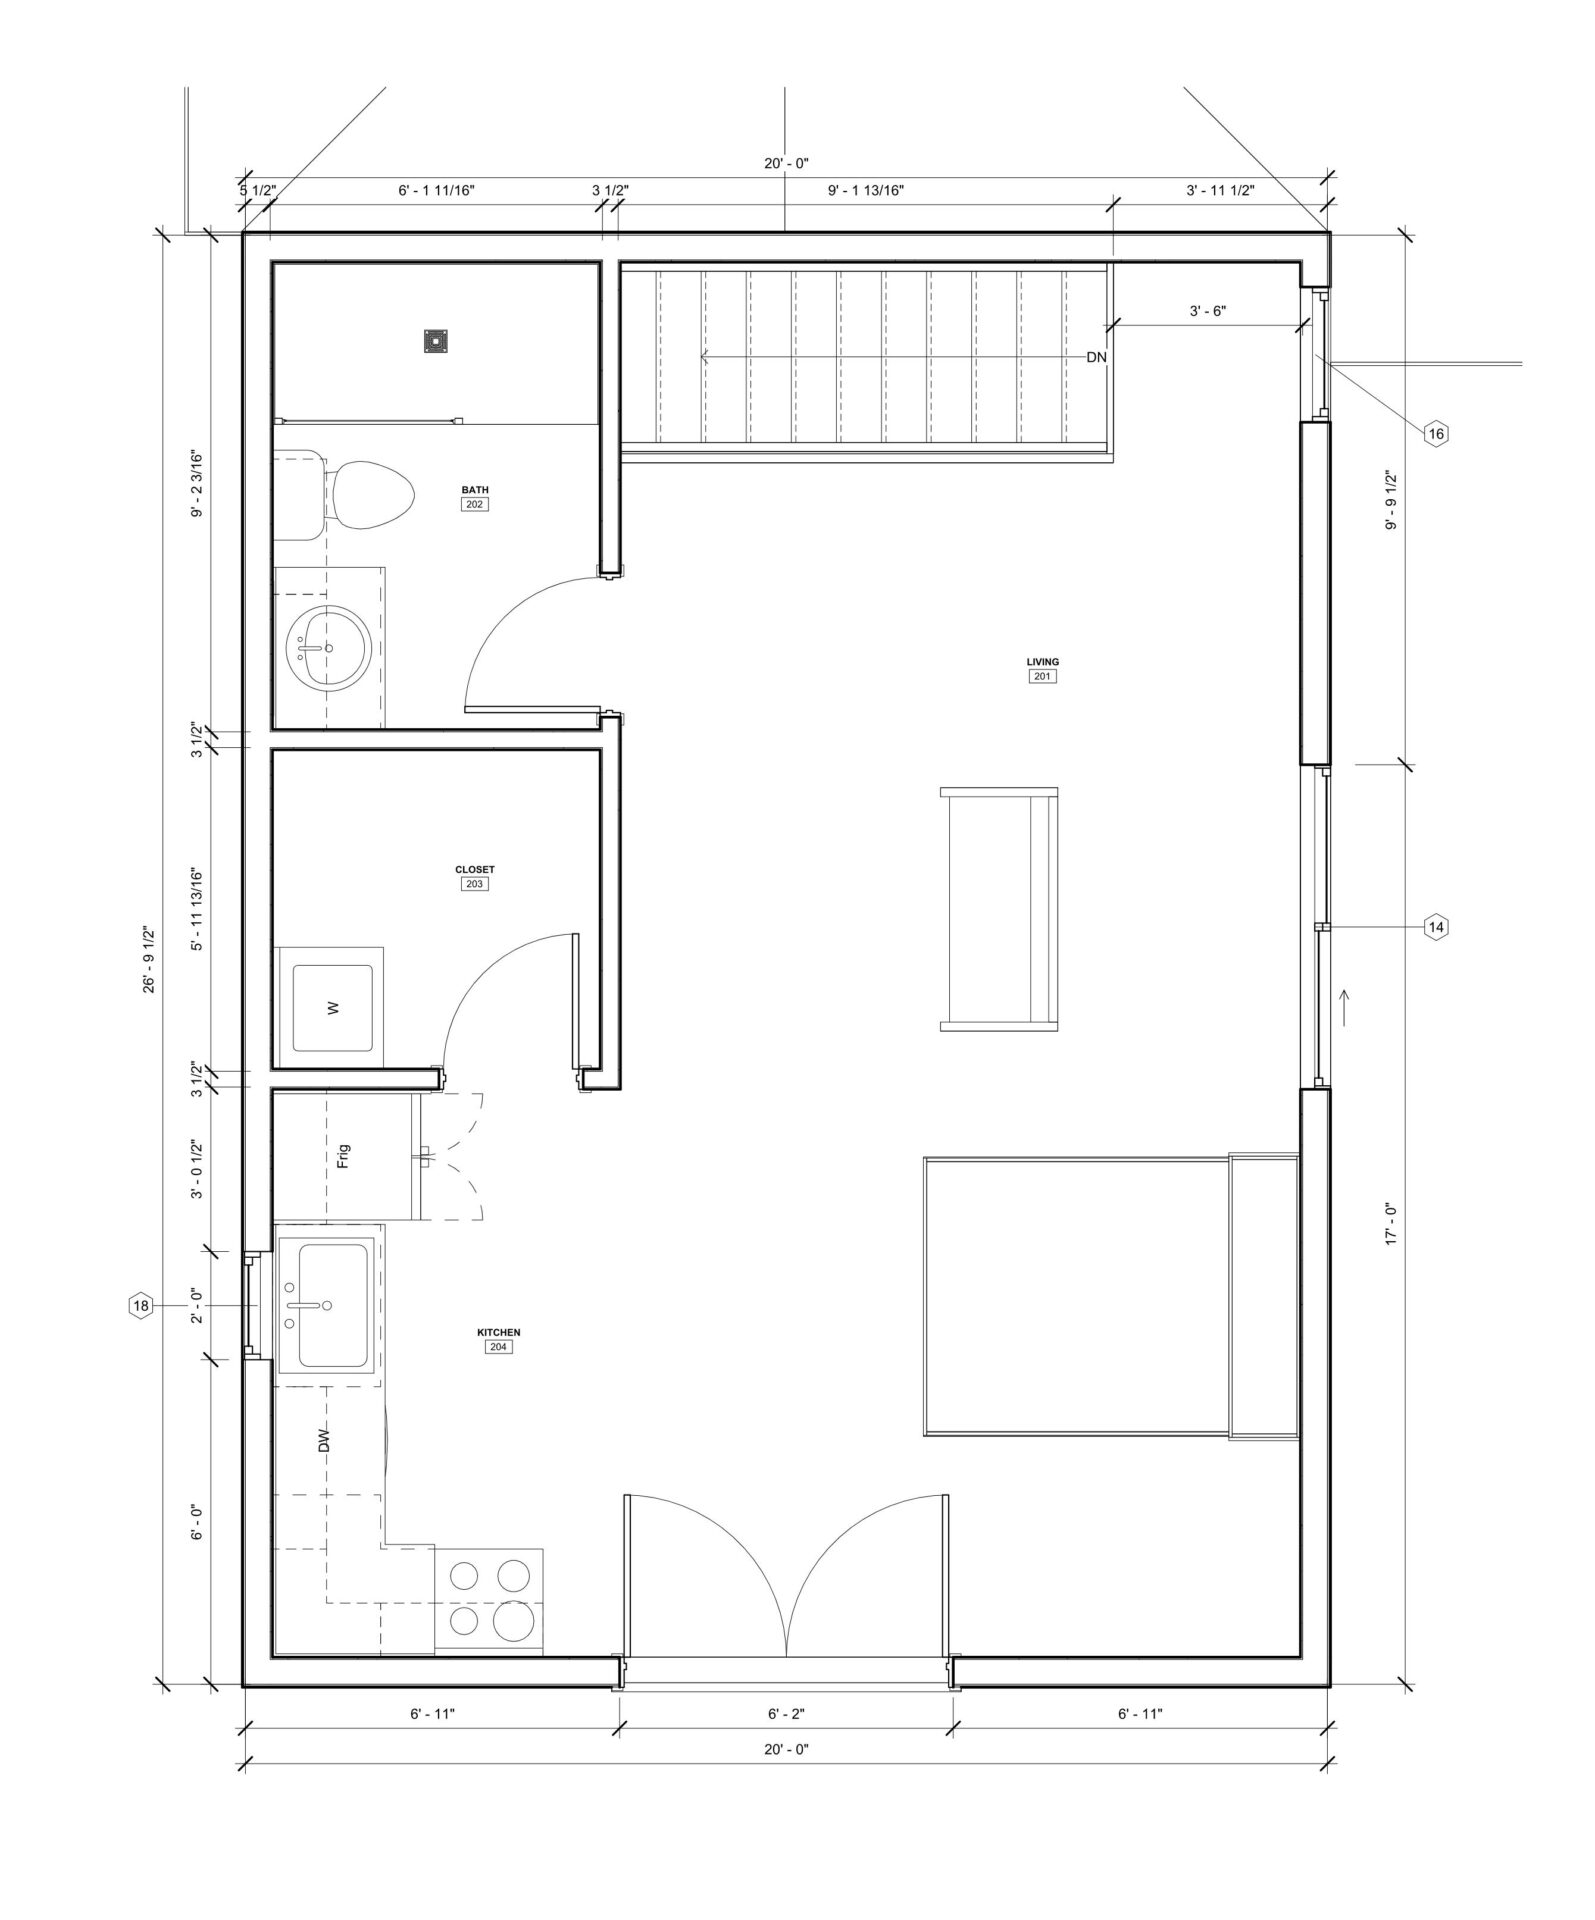 Floor Plan for ADU Construction Including Separate Kitchen and Bathroom